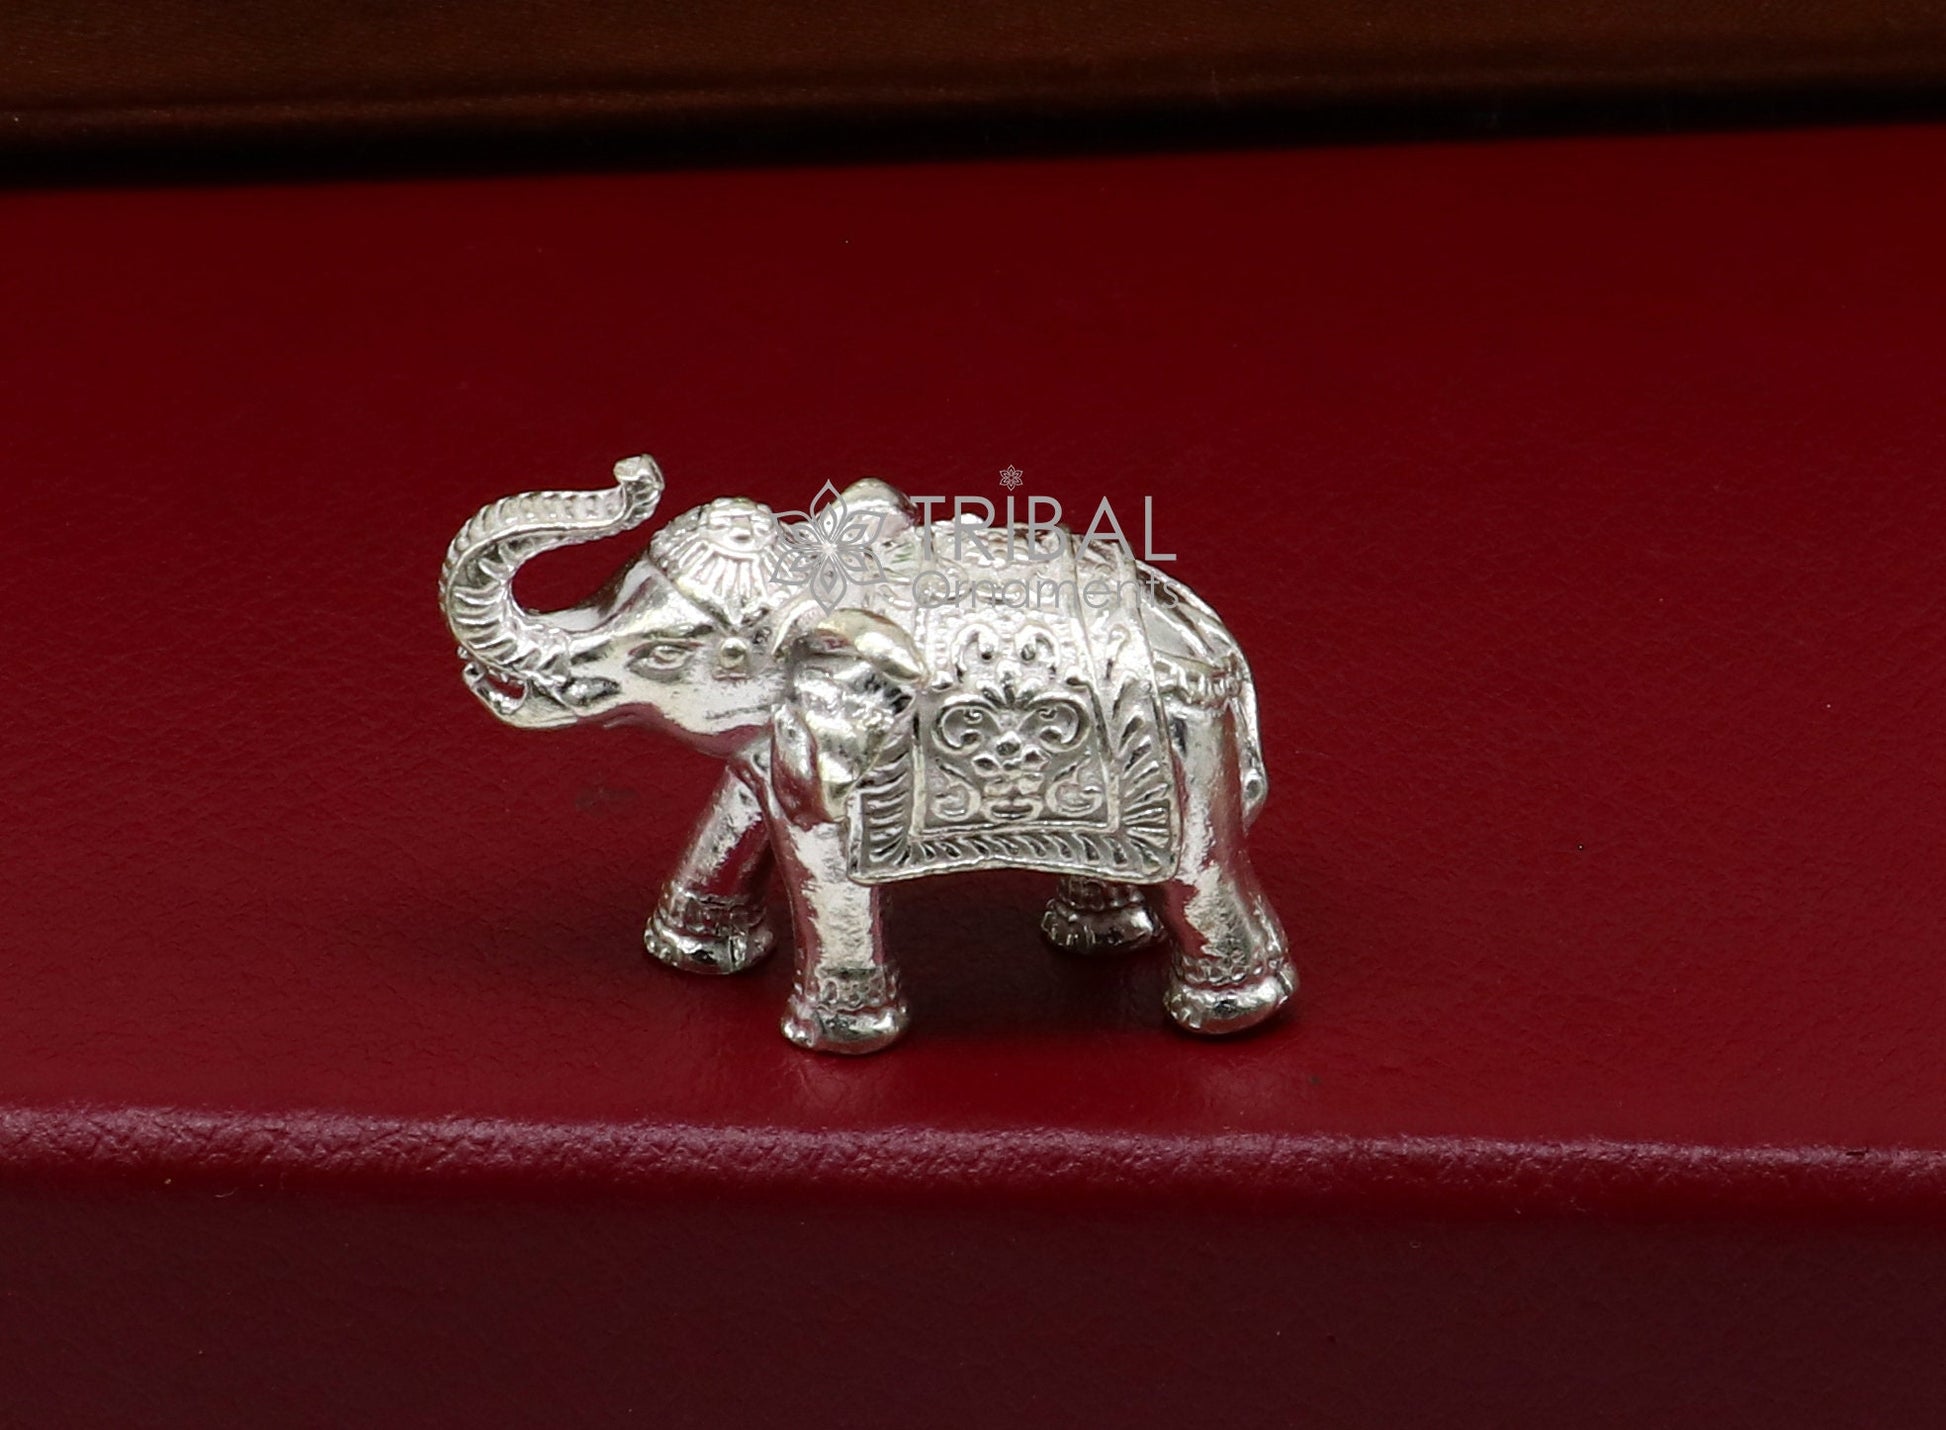 Fully solid 925 Sterling silver Elephant statue/ figurine sculpture, best gifting or puja article figurine for wealth and prosperity art607 - TRIBAL ORNAMENTS